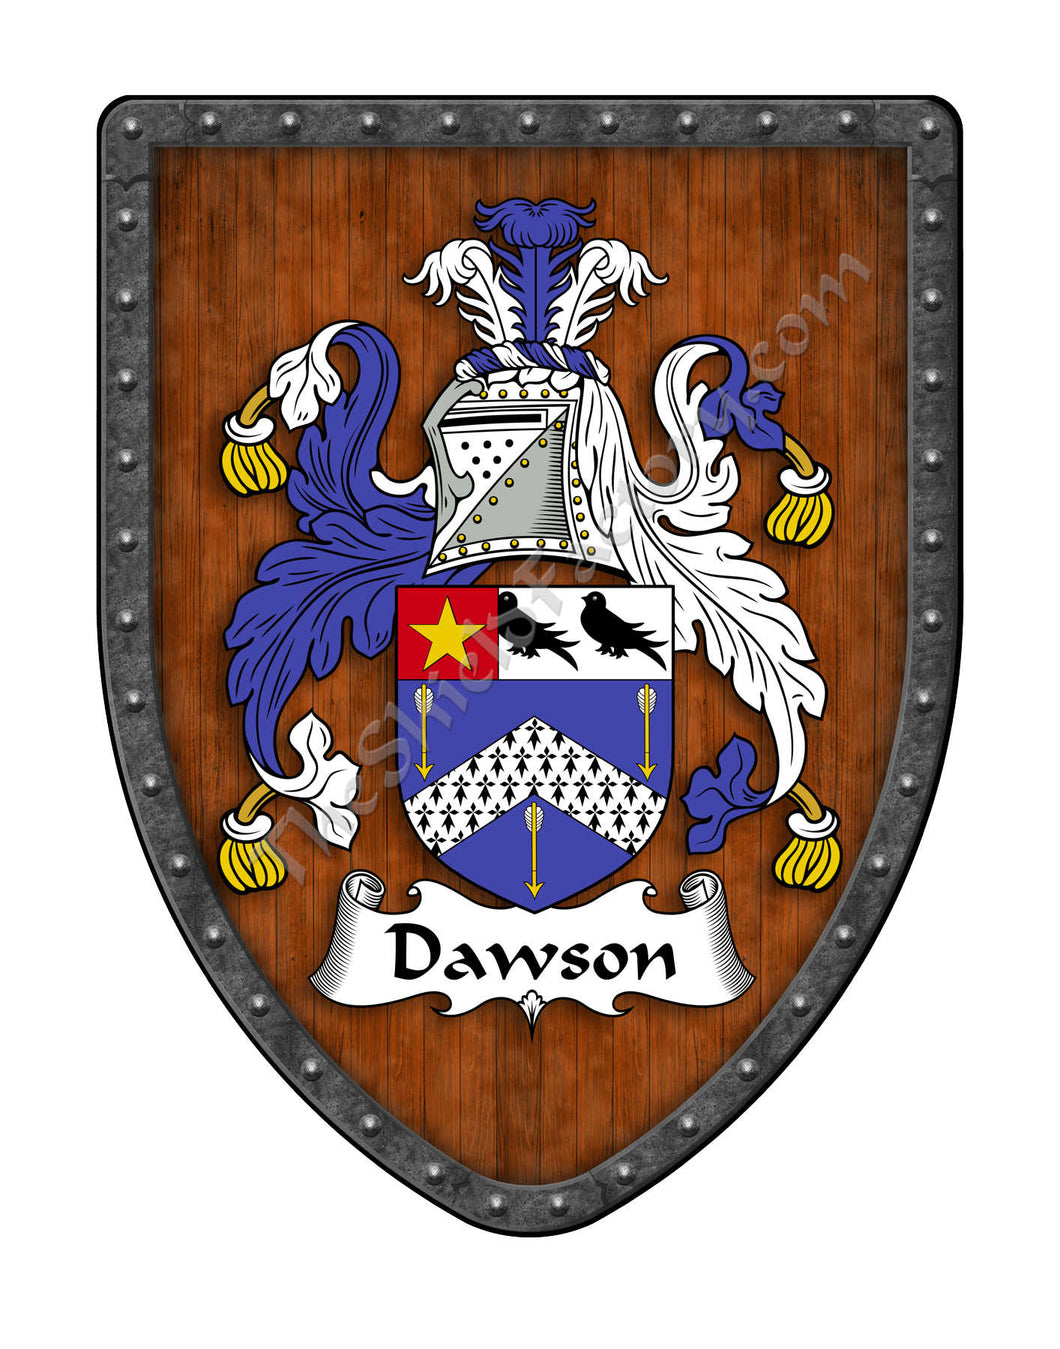 Dawson Coat of Arms Shield Family Crest